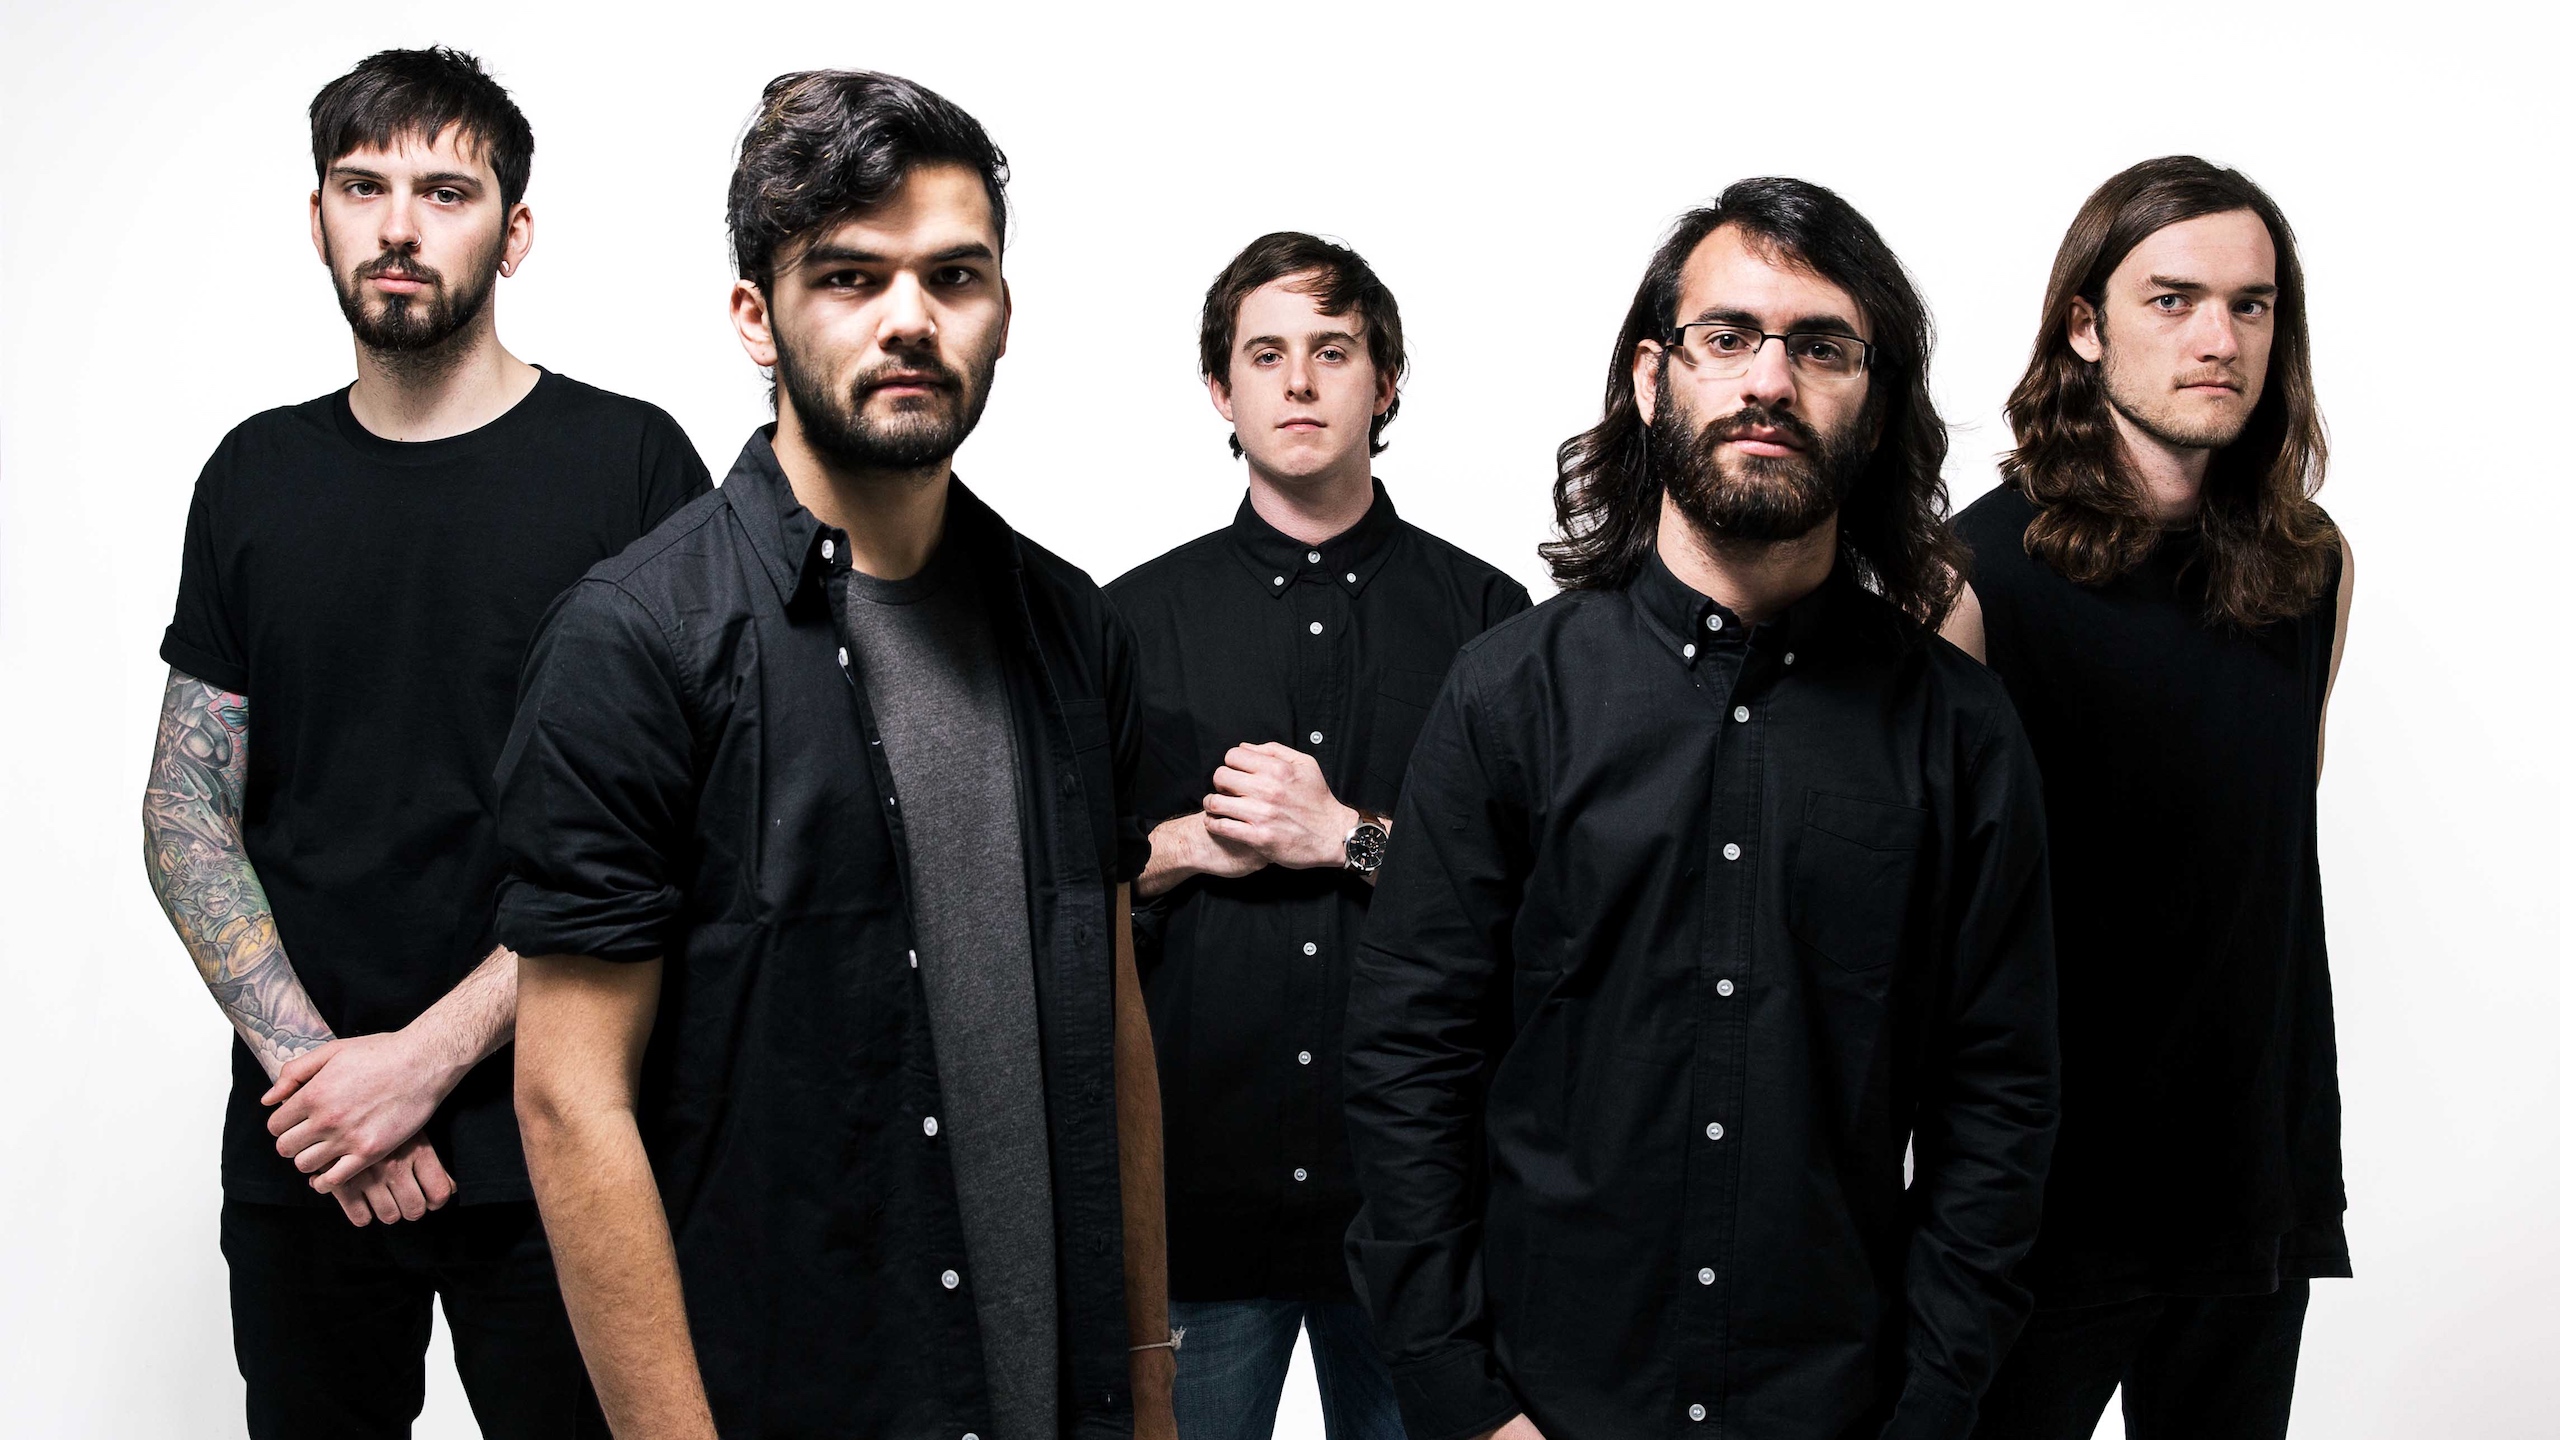 Northlane release acoustic version of ‘Solar’ ahead of UK tour